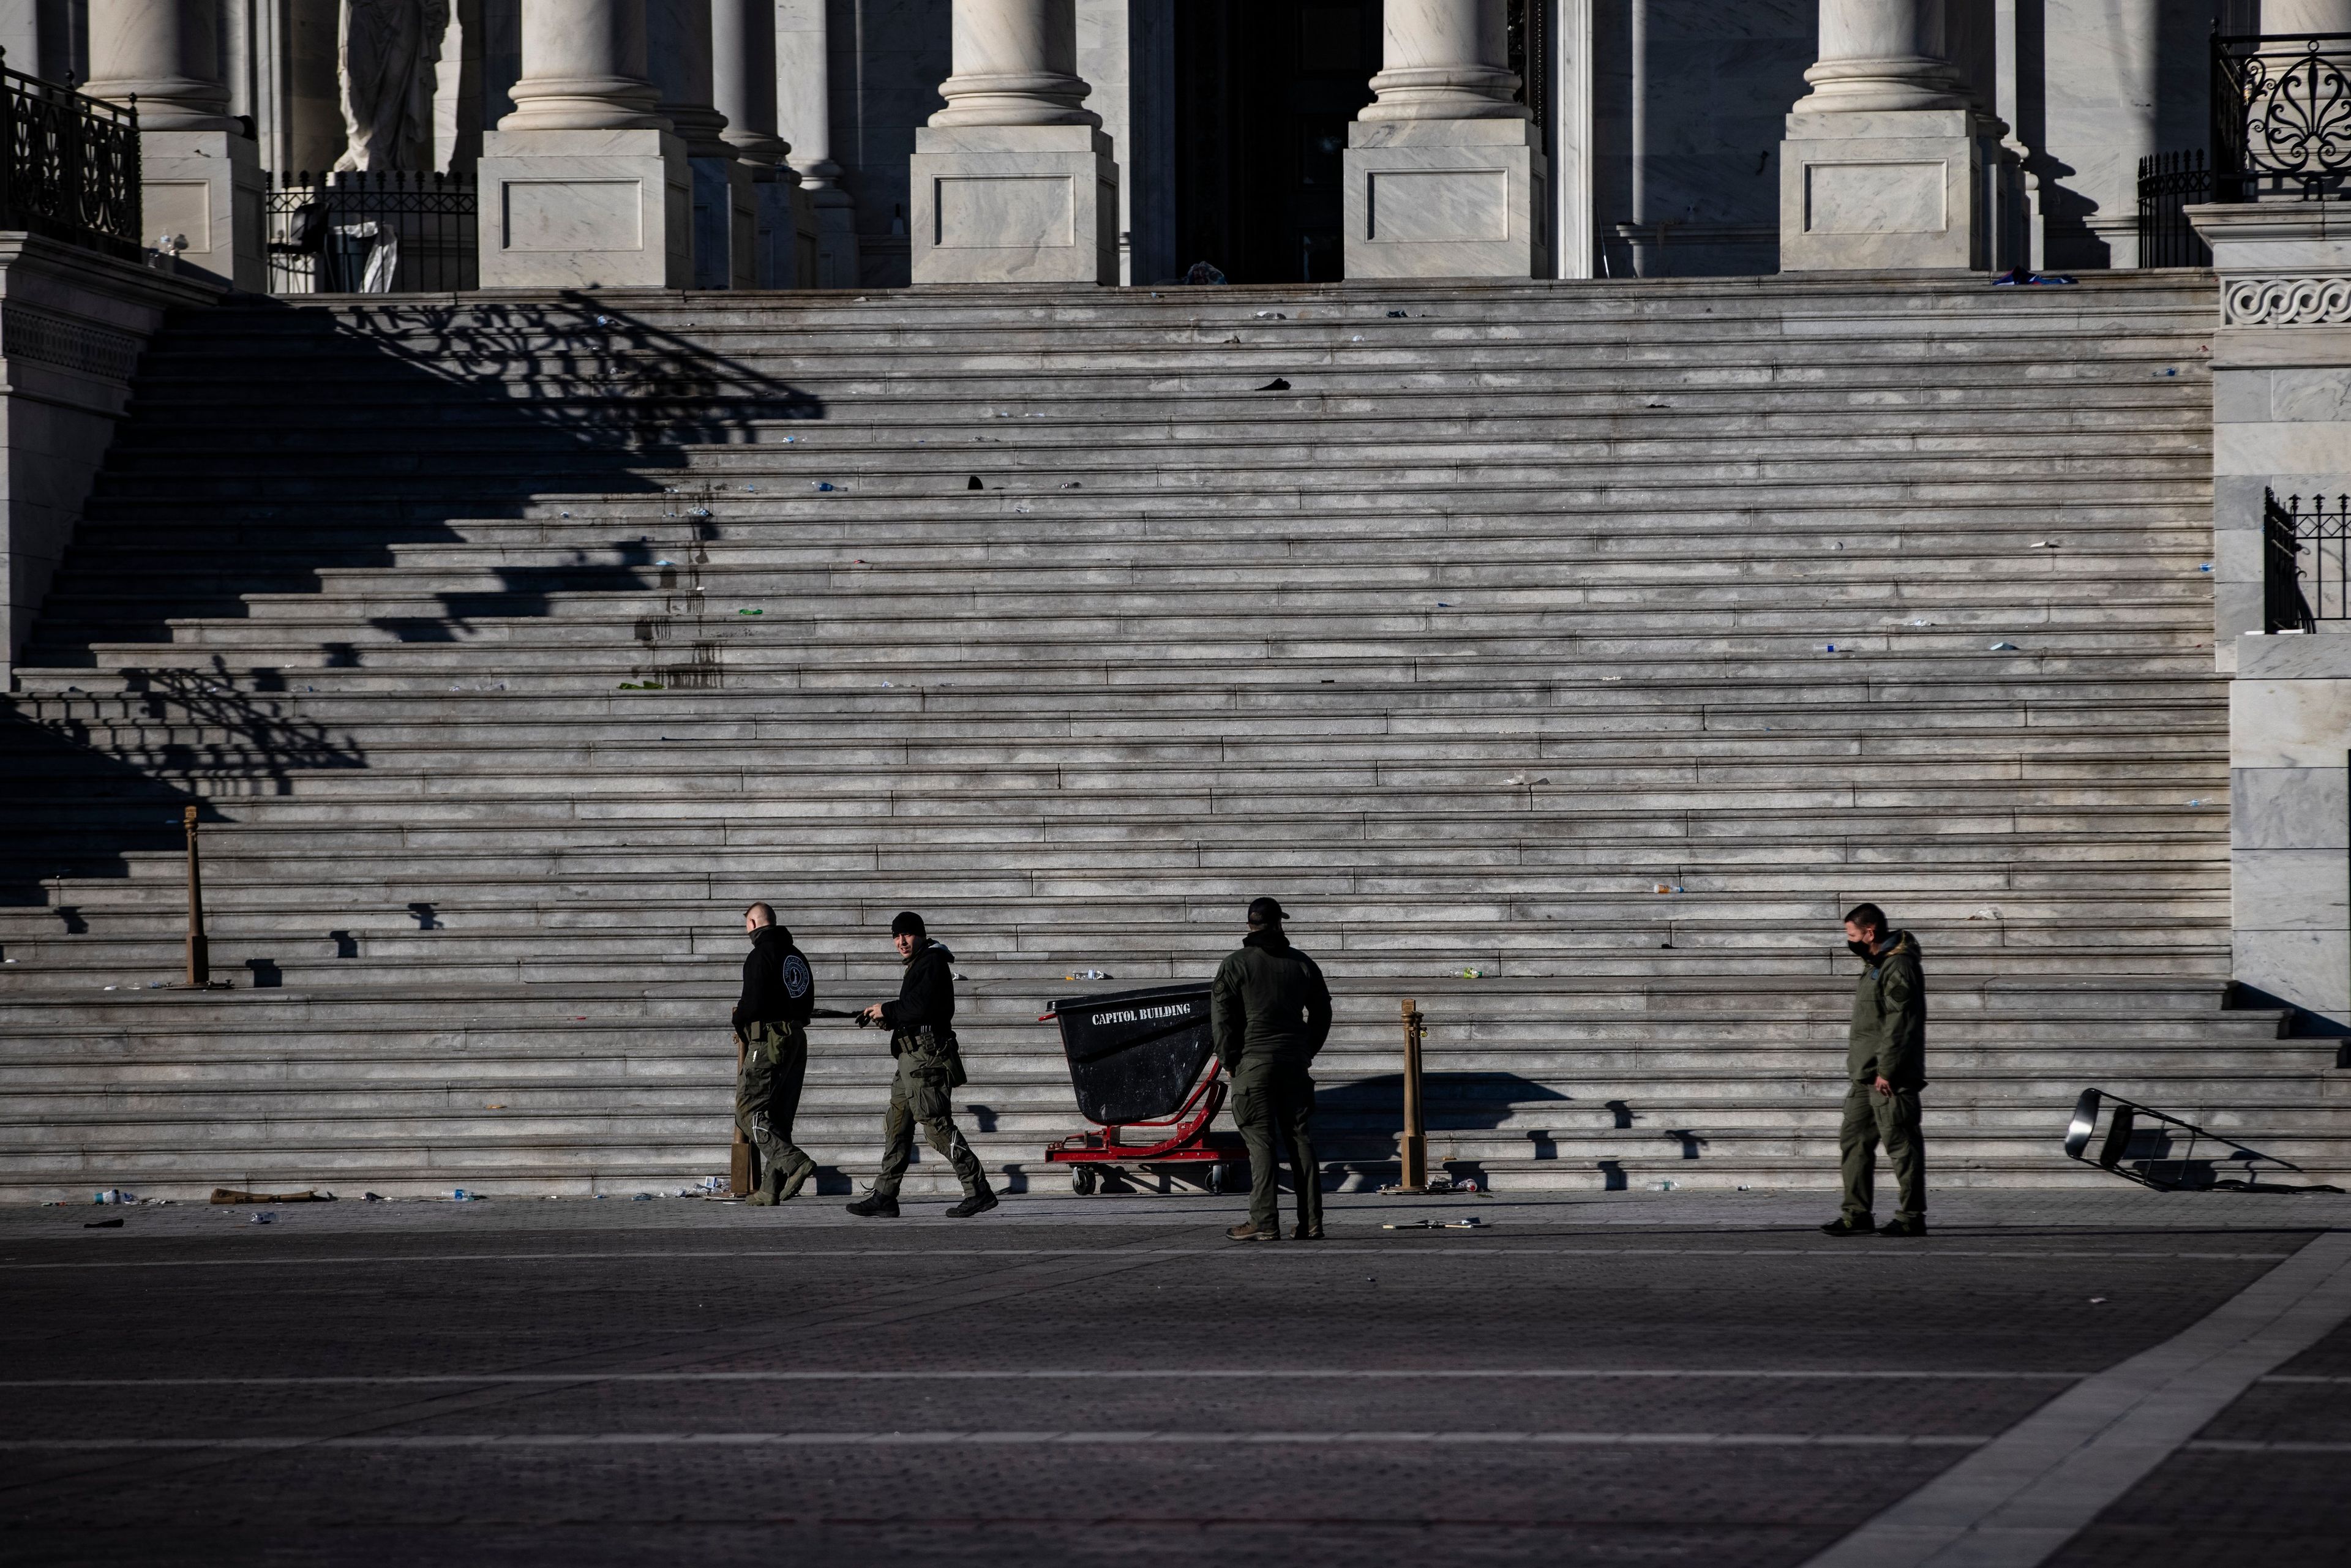 Police officers survey the damage and debris left on the Eastern steps of the U.S. Capitol Building on Jan. 7, 2021 in Washington, DC (Samuel Corum/Getty Images)